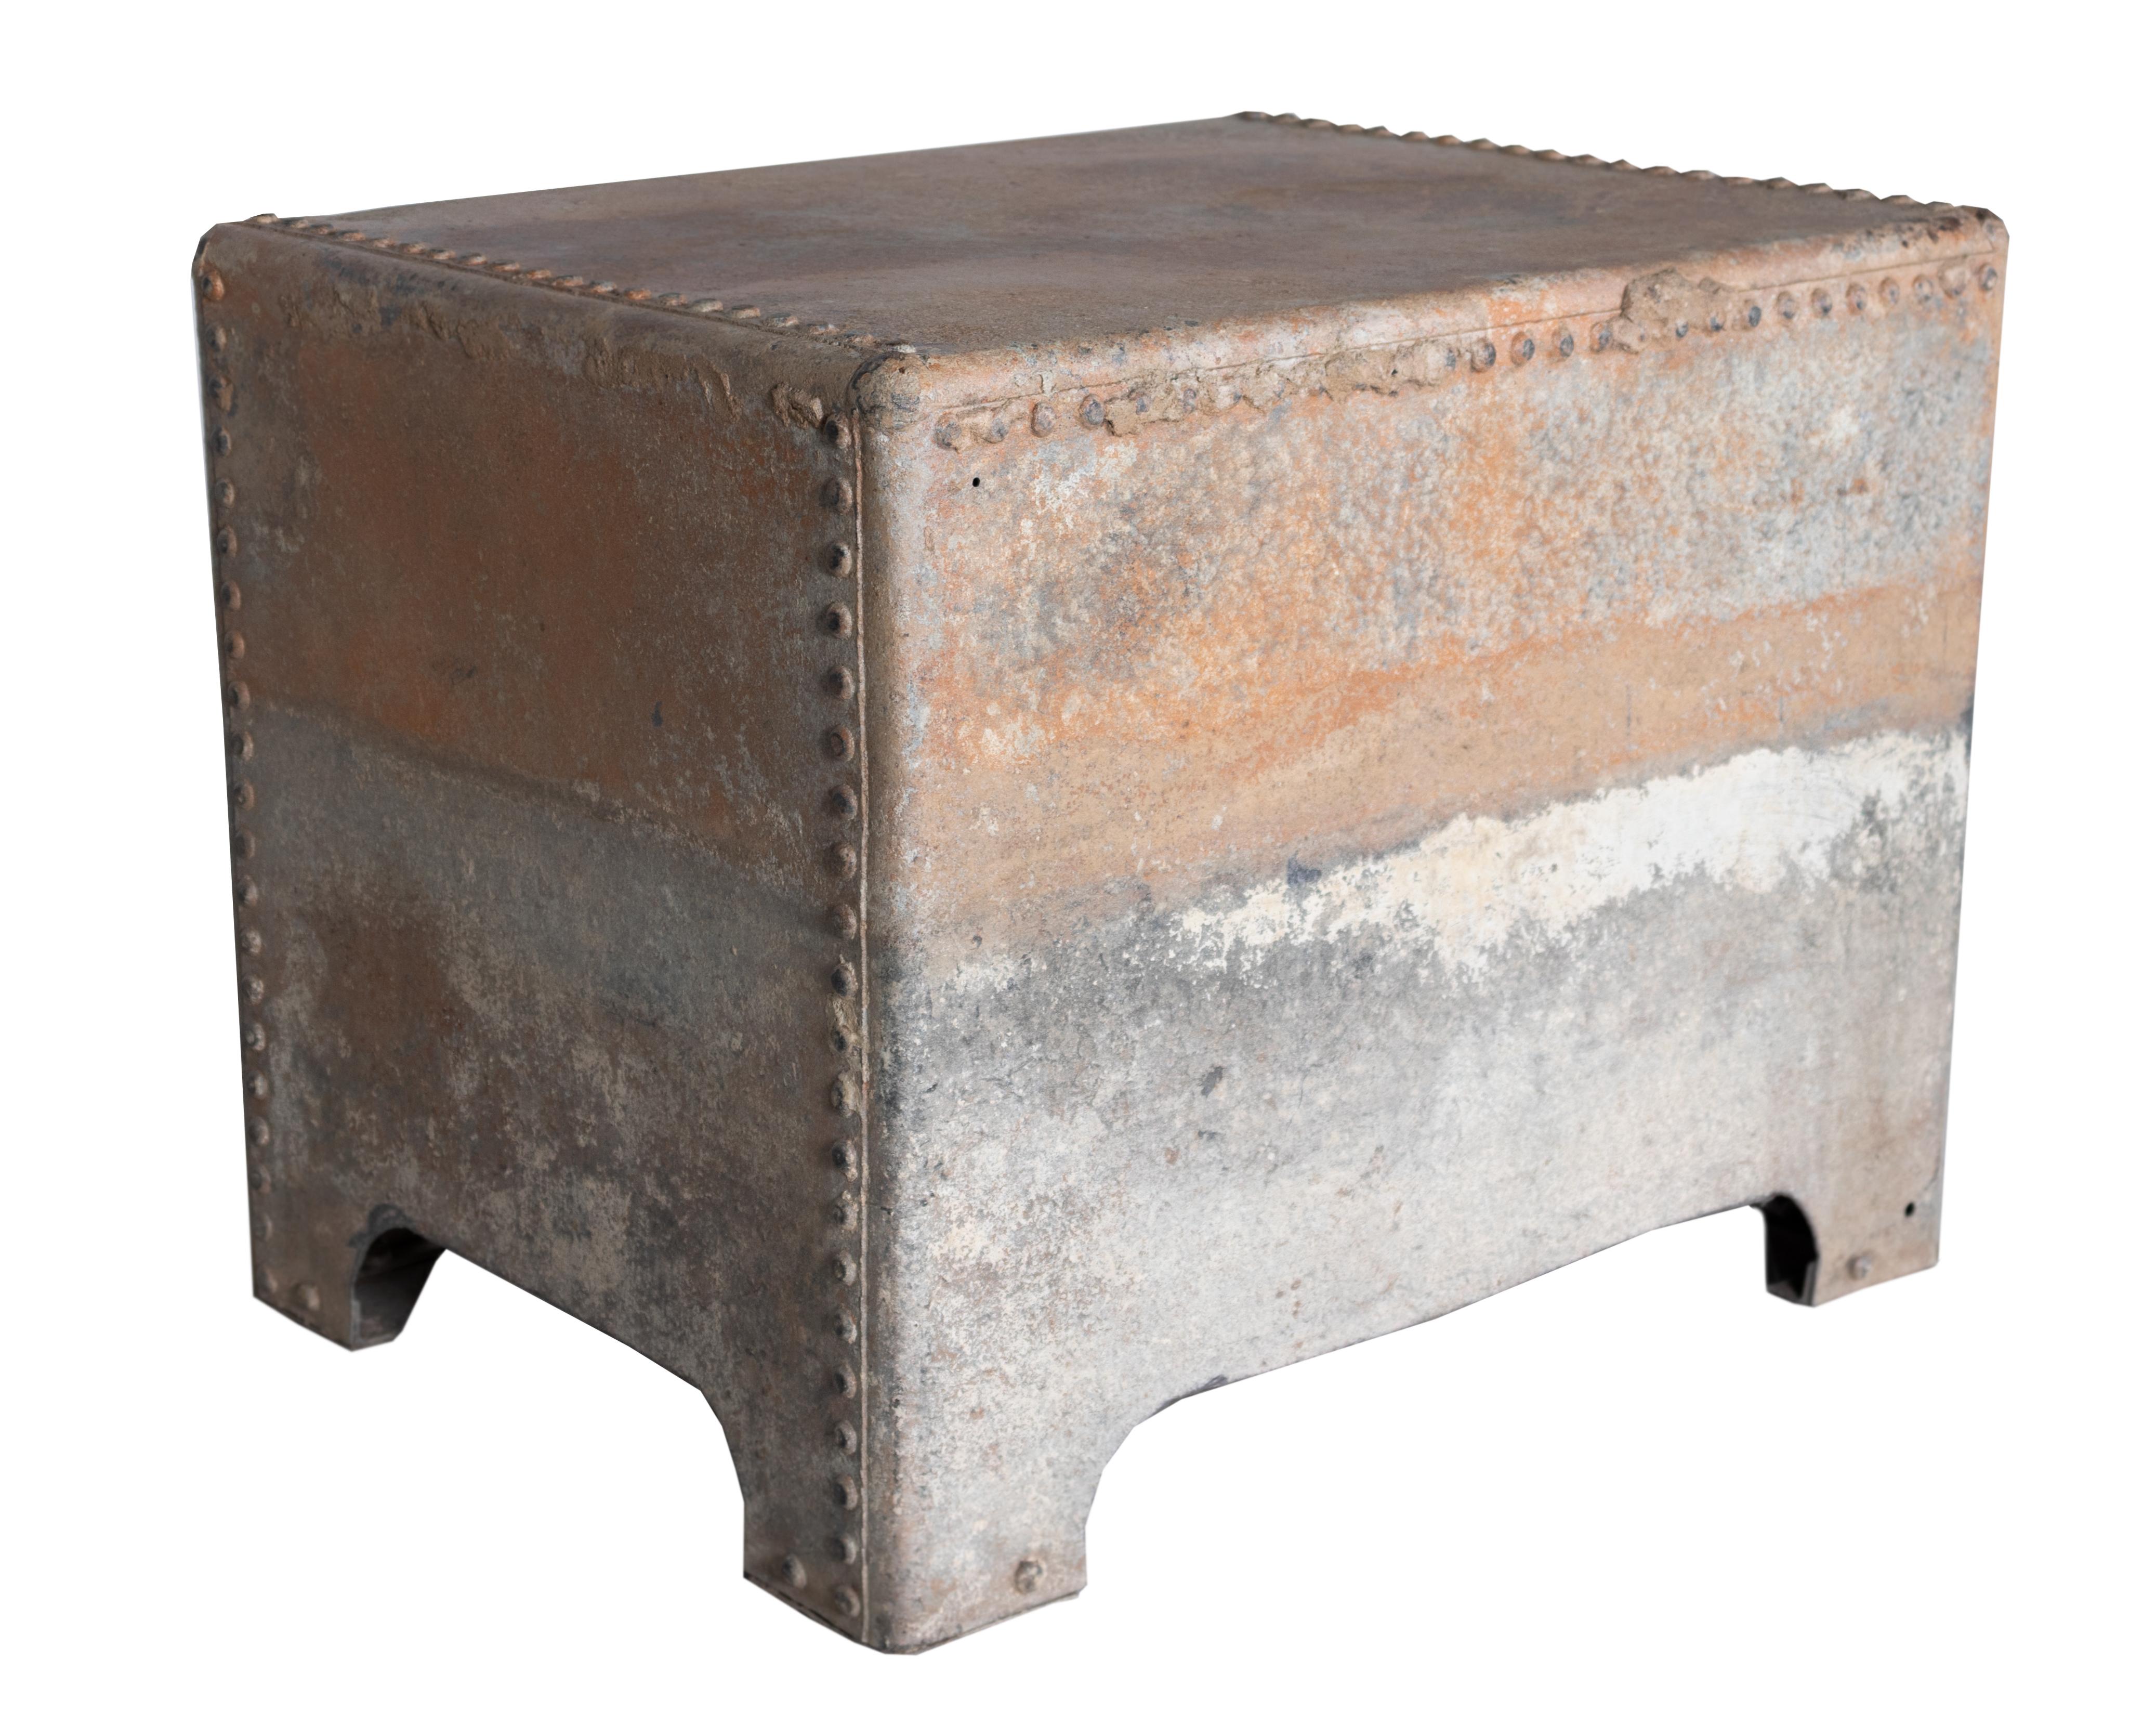 Other English Galvanized Chest